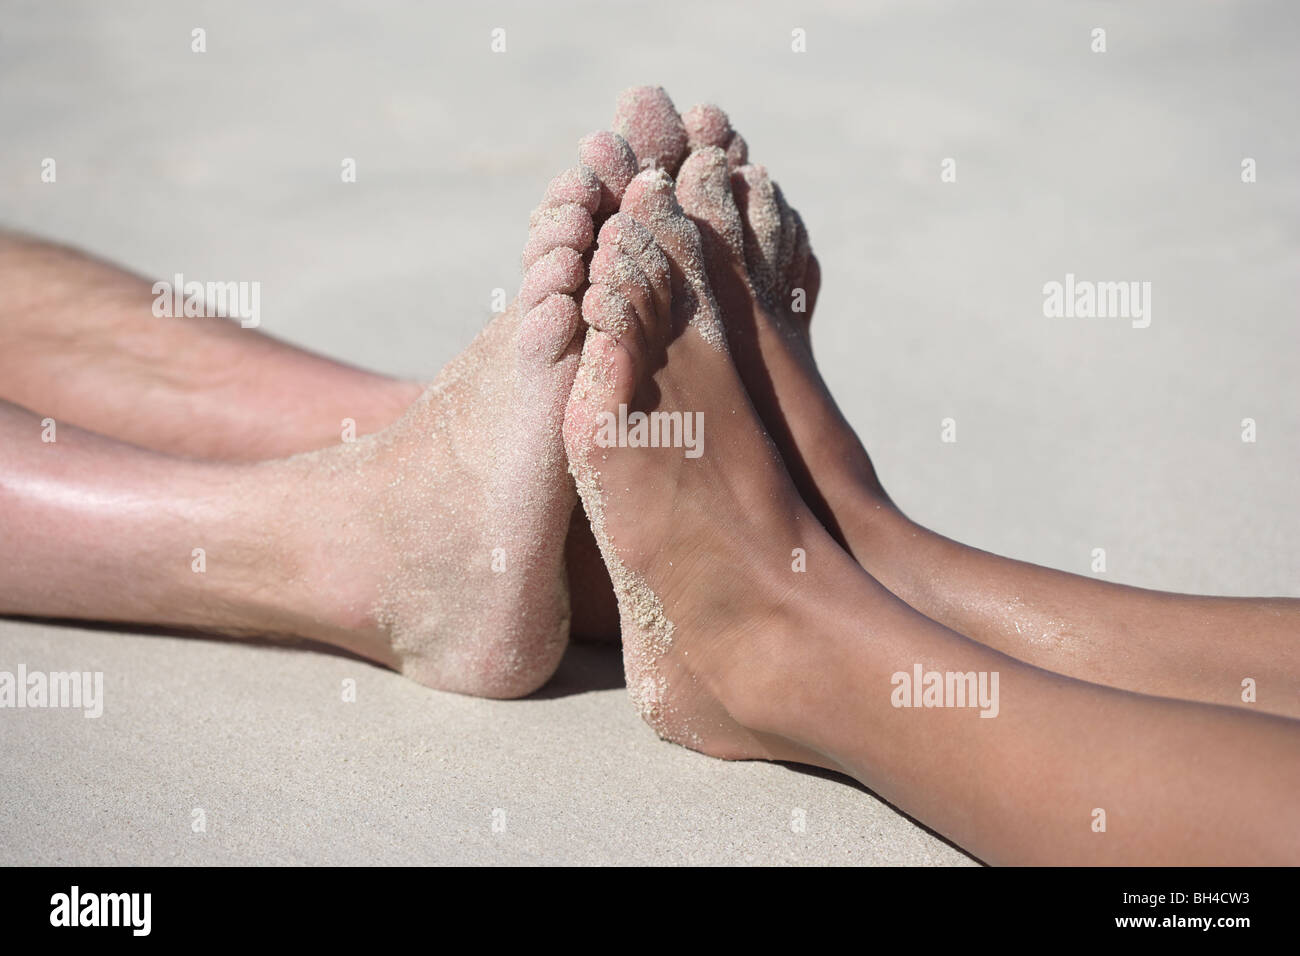 A man and a woman pressing their feet against each other lying on a sandy beach Stock Photo